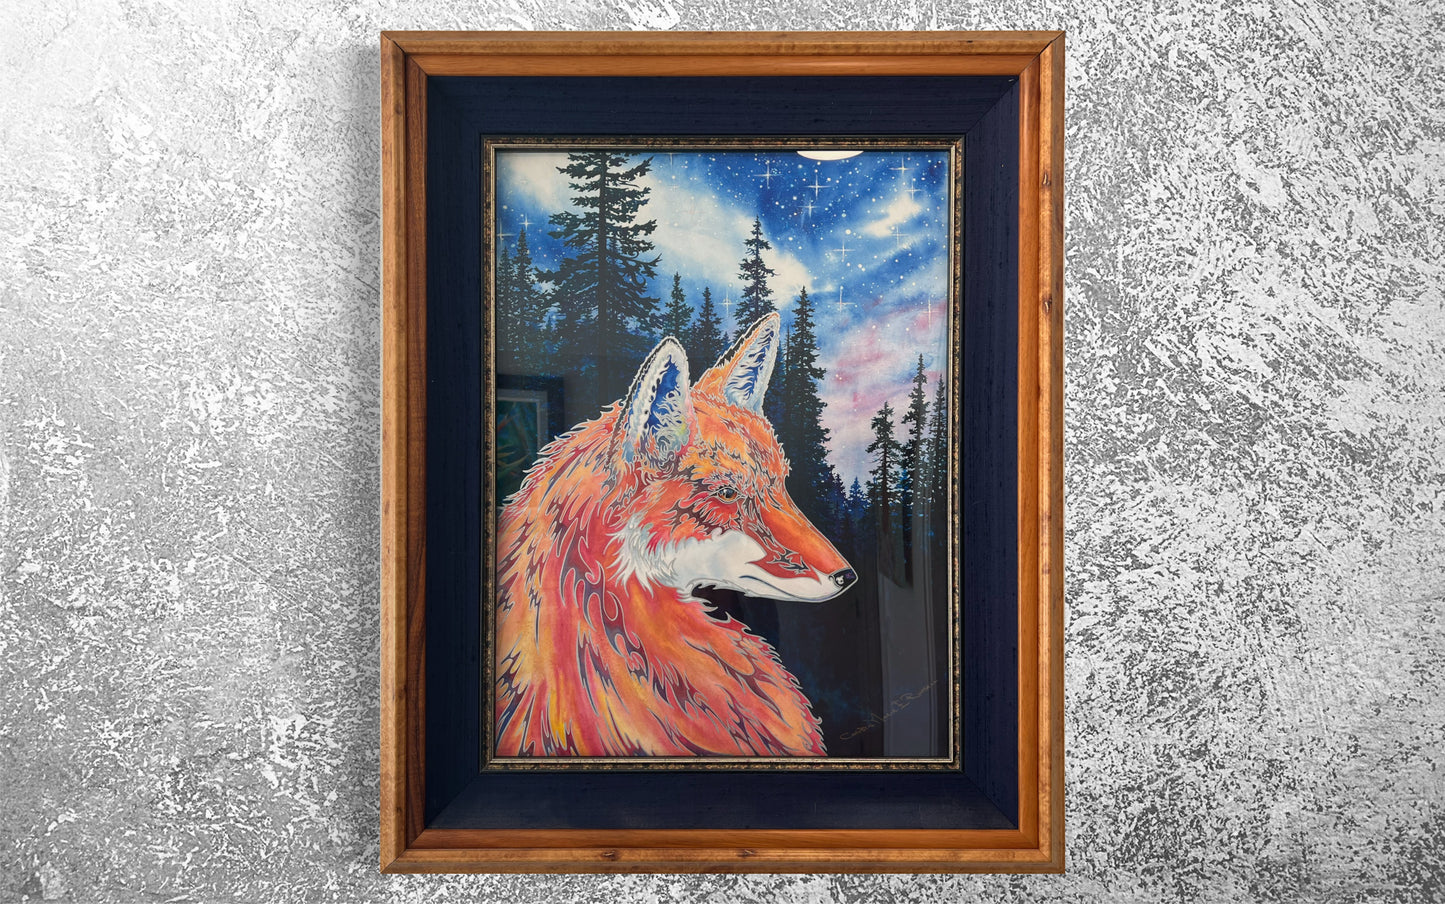 ORIGINAL"Spirit Fox" Professionally Framed Wild Fox Fine Art mixed media Watercolor silhouetted forest trees Christie Marie E. Russell ©